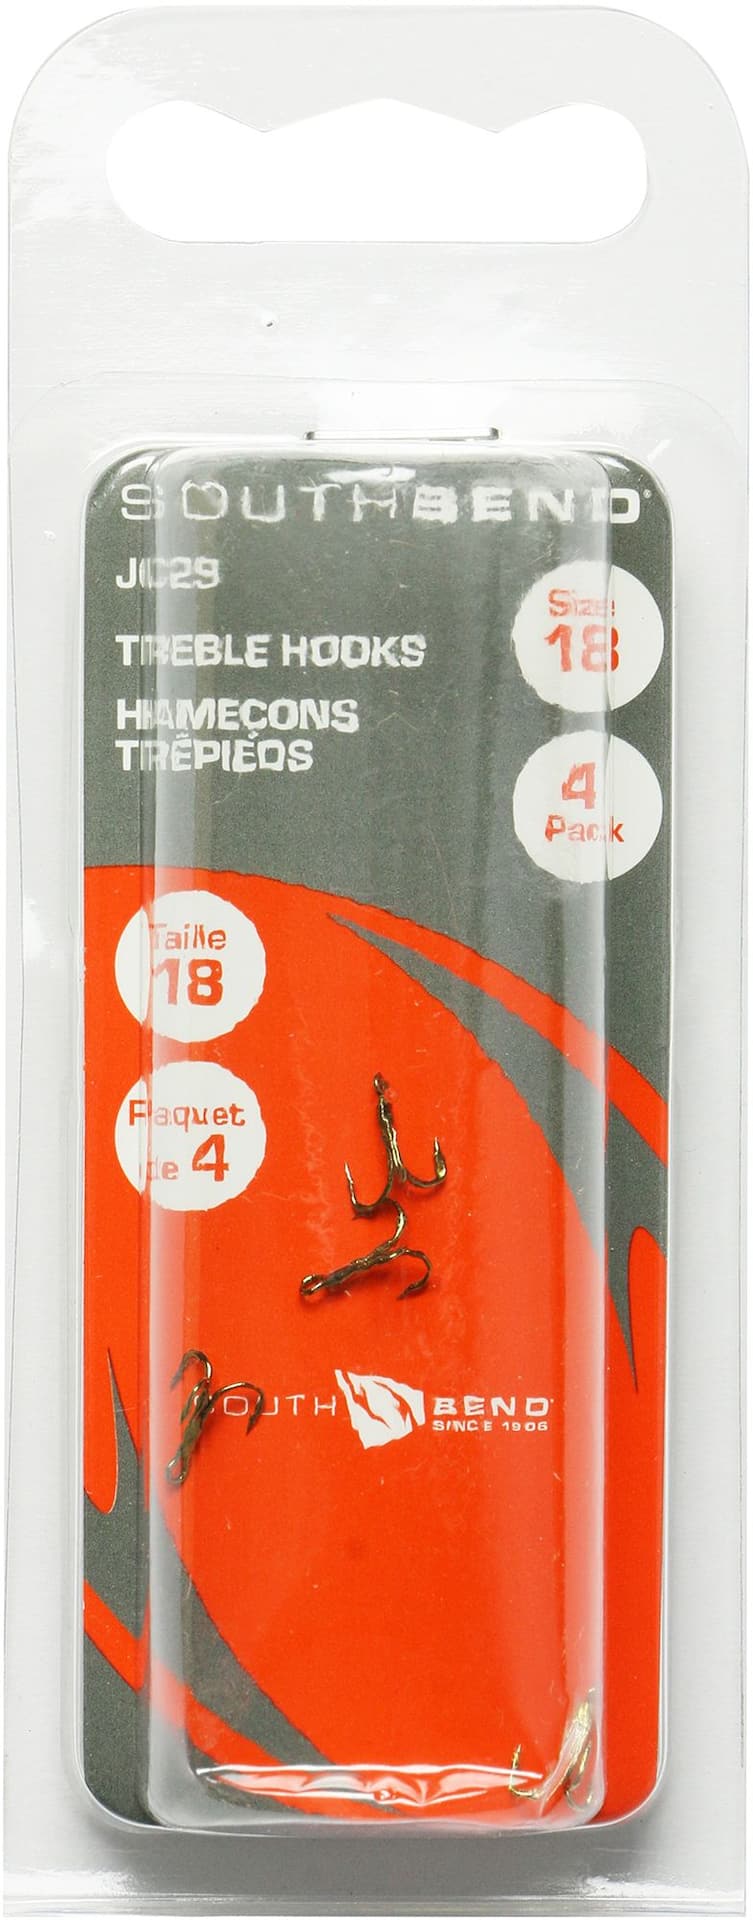 https://media-www.canadiantire.ca/product/playing/fishing/fishing-lures/0779759/south-bend-treble-hook-bronze-pack-4-size-18-83cdea7b-07e5-4881-a99b-f81643d62cff-jpgrendition.jpg